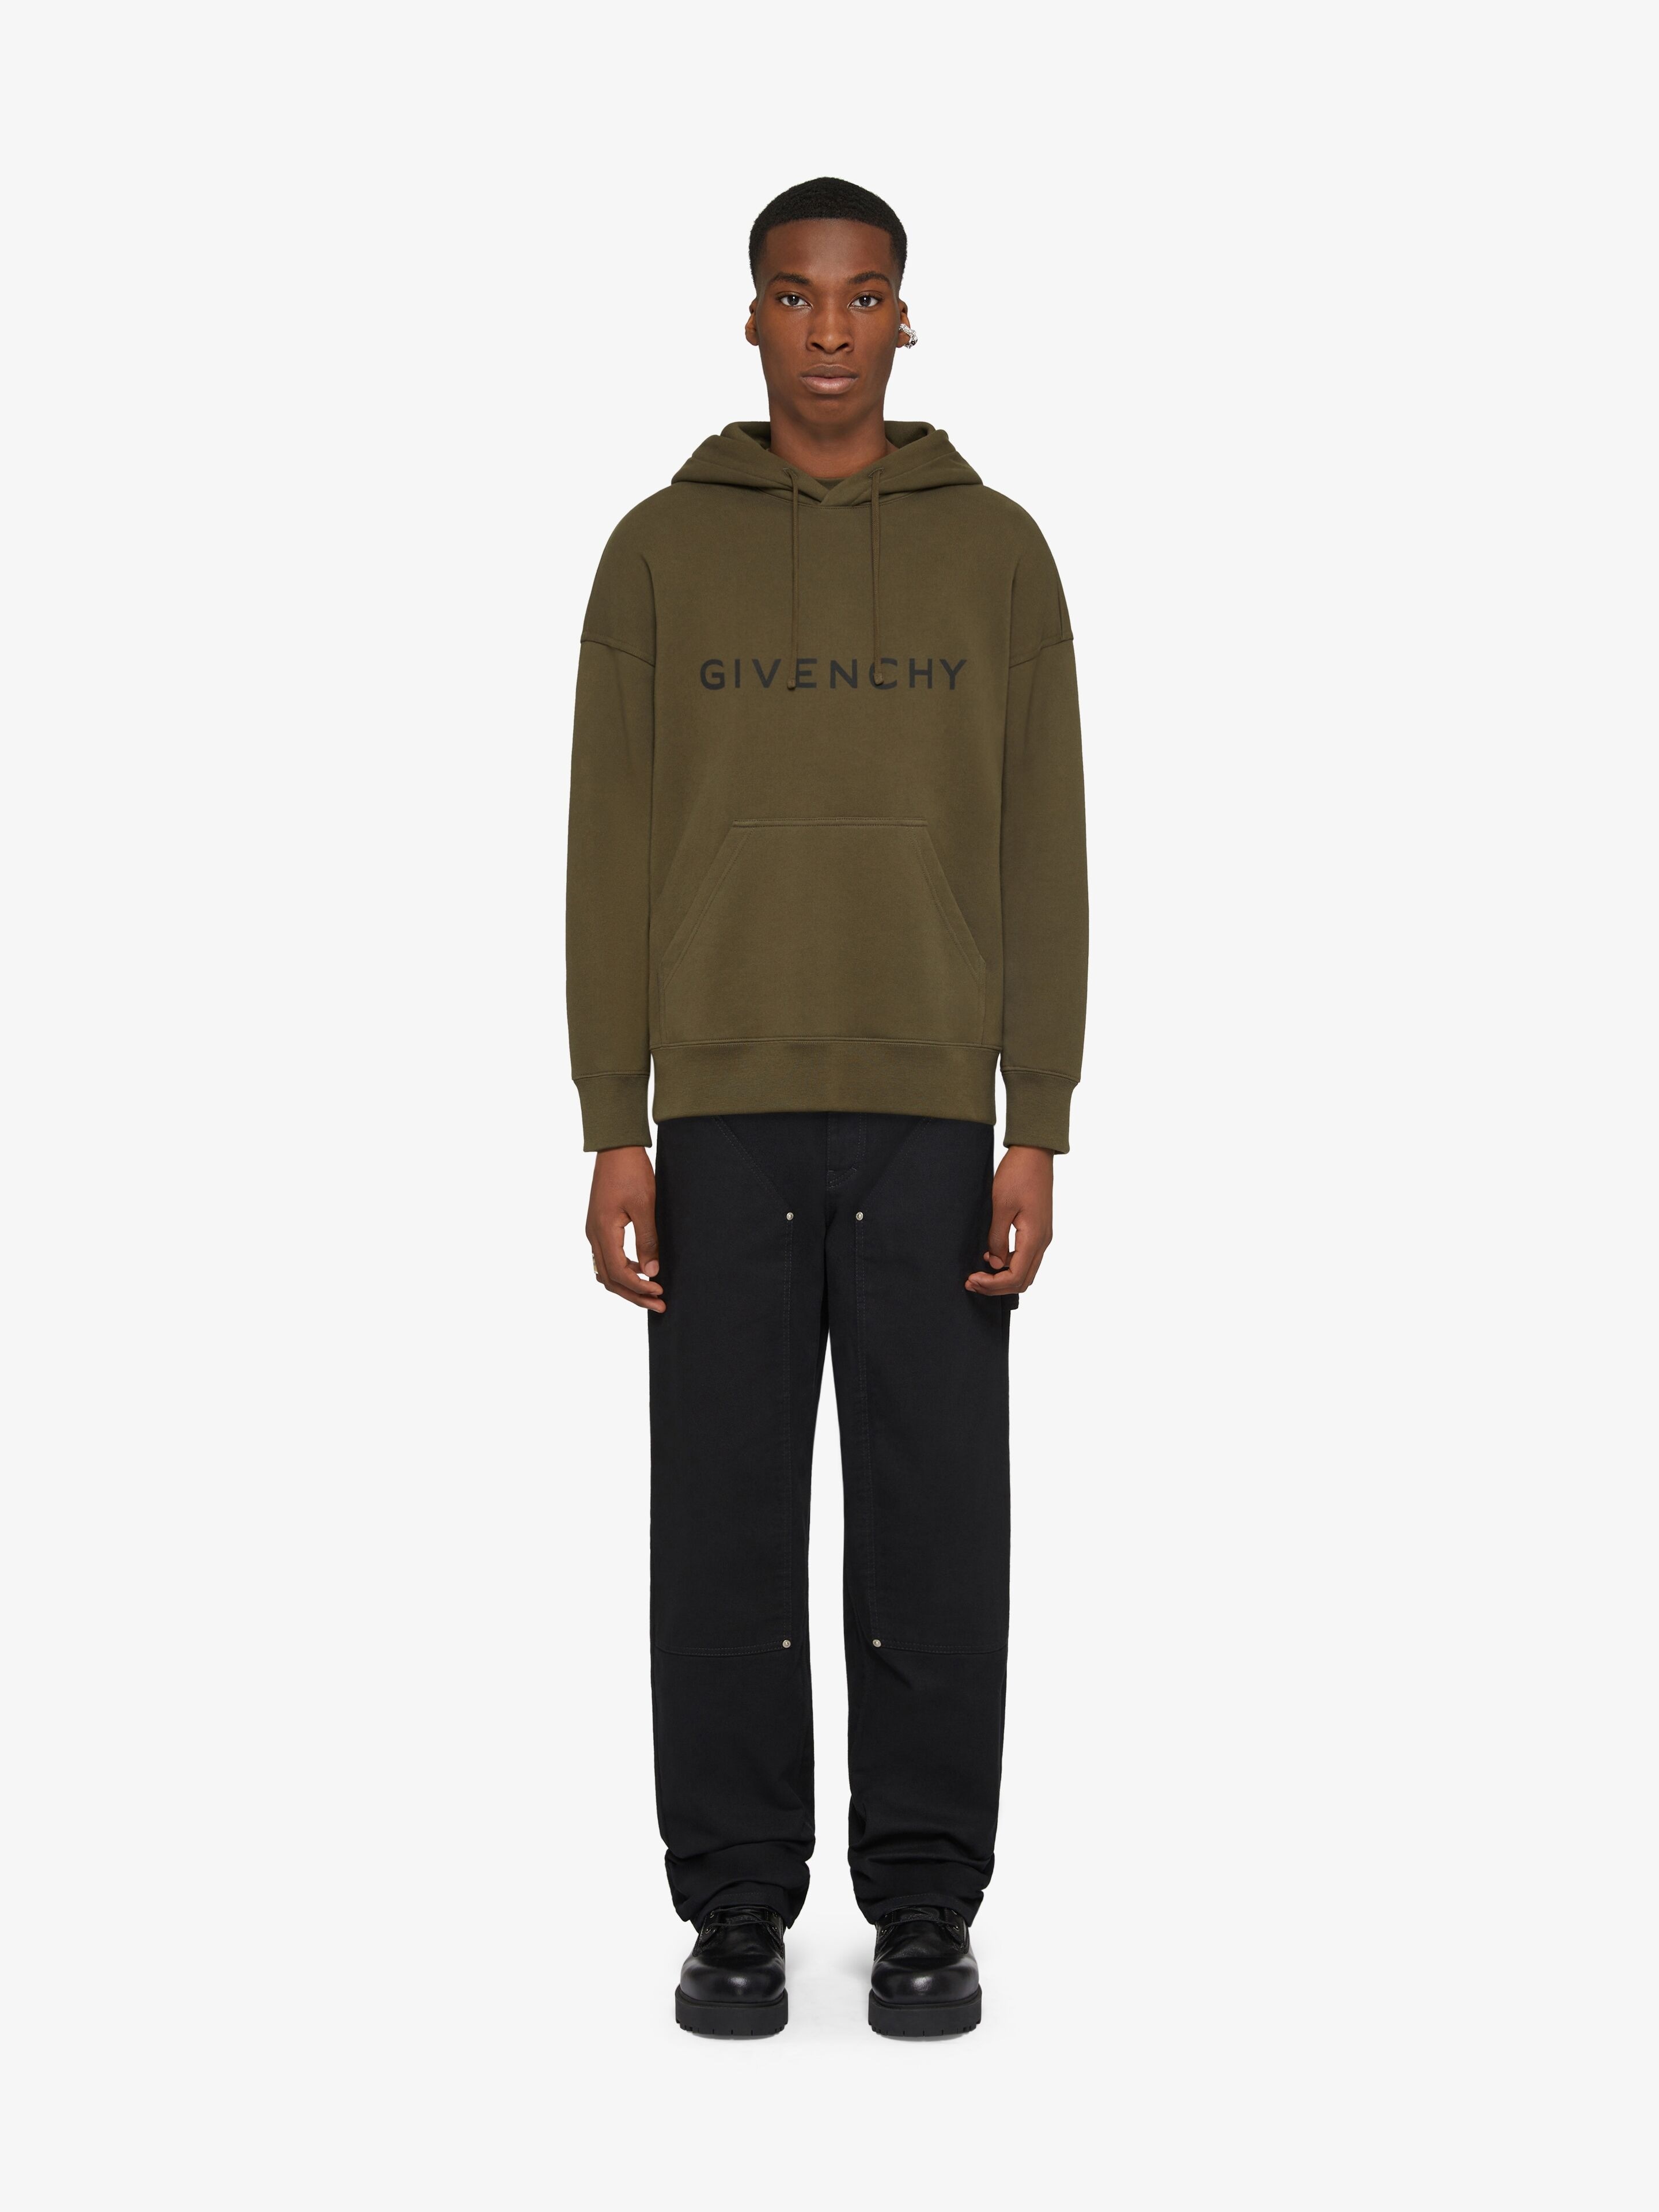 GIVENCHY ARCHETYPE SLIM FIT HOODIE IN FLEECE - 2